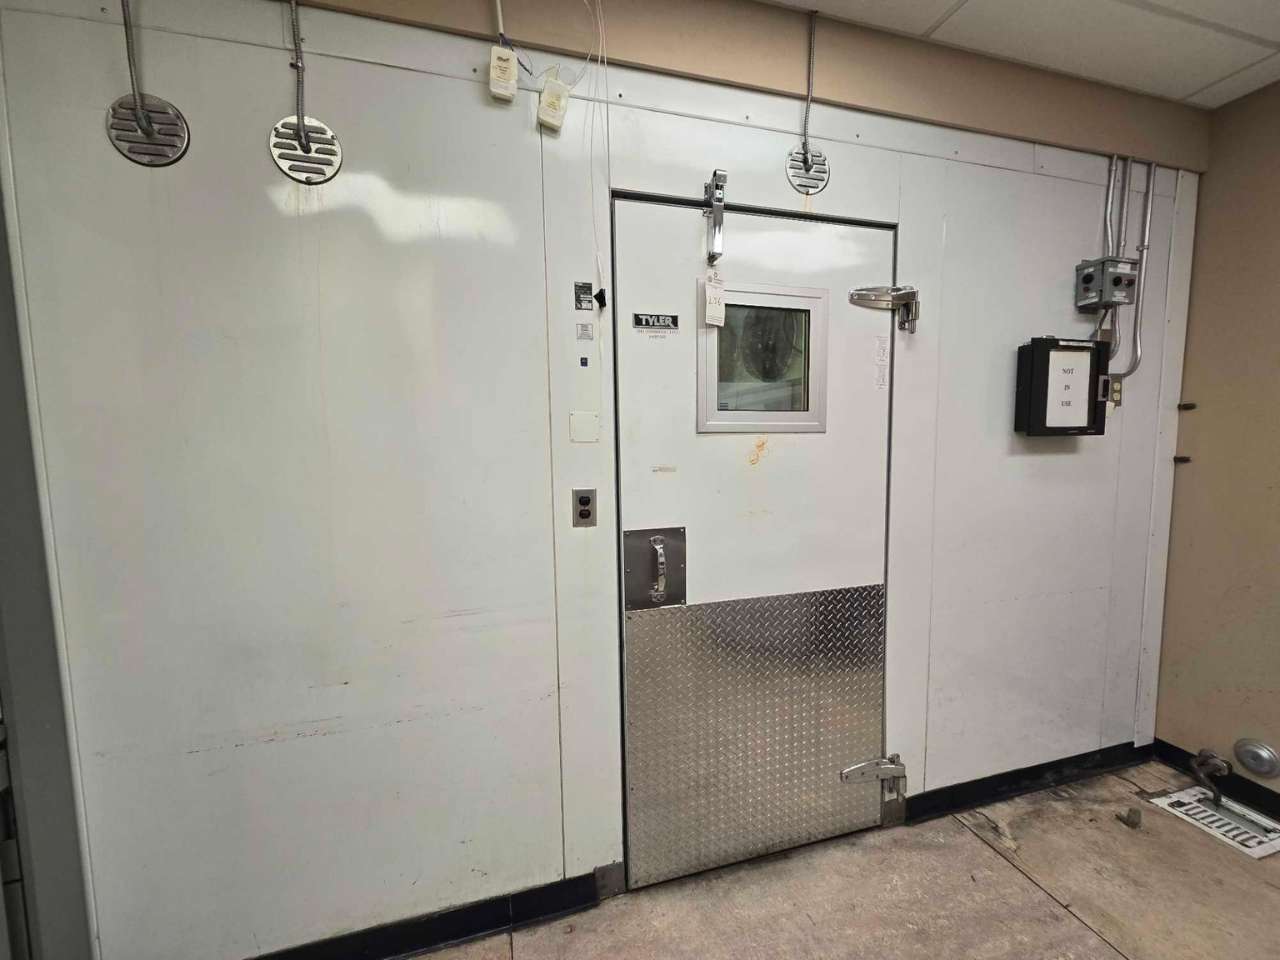 Laboratory Equipment from the Complete Liquidation of Blood Bank Facility